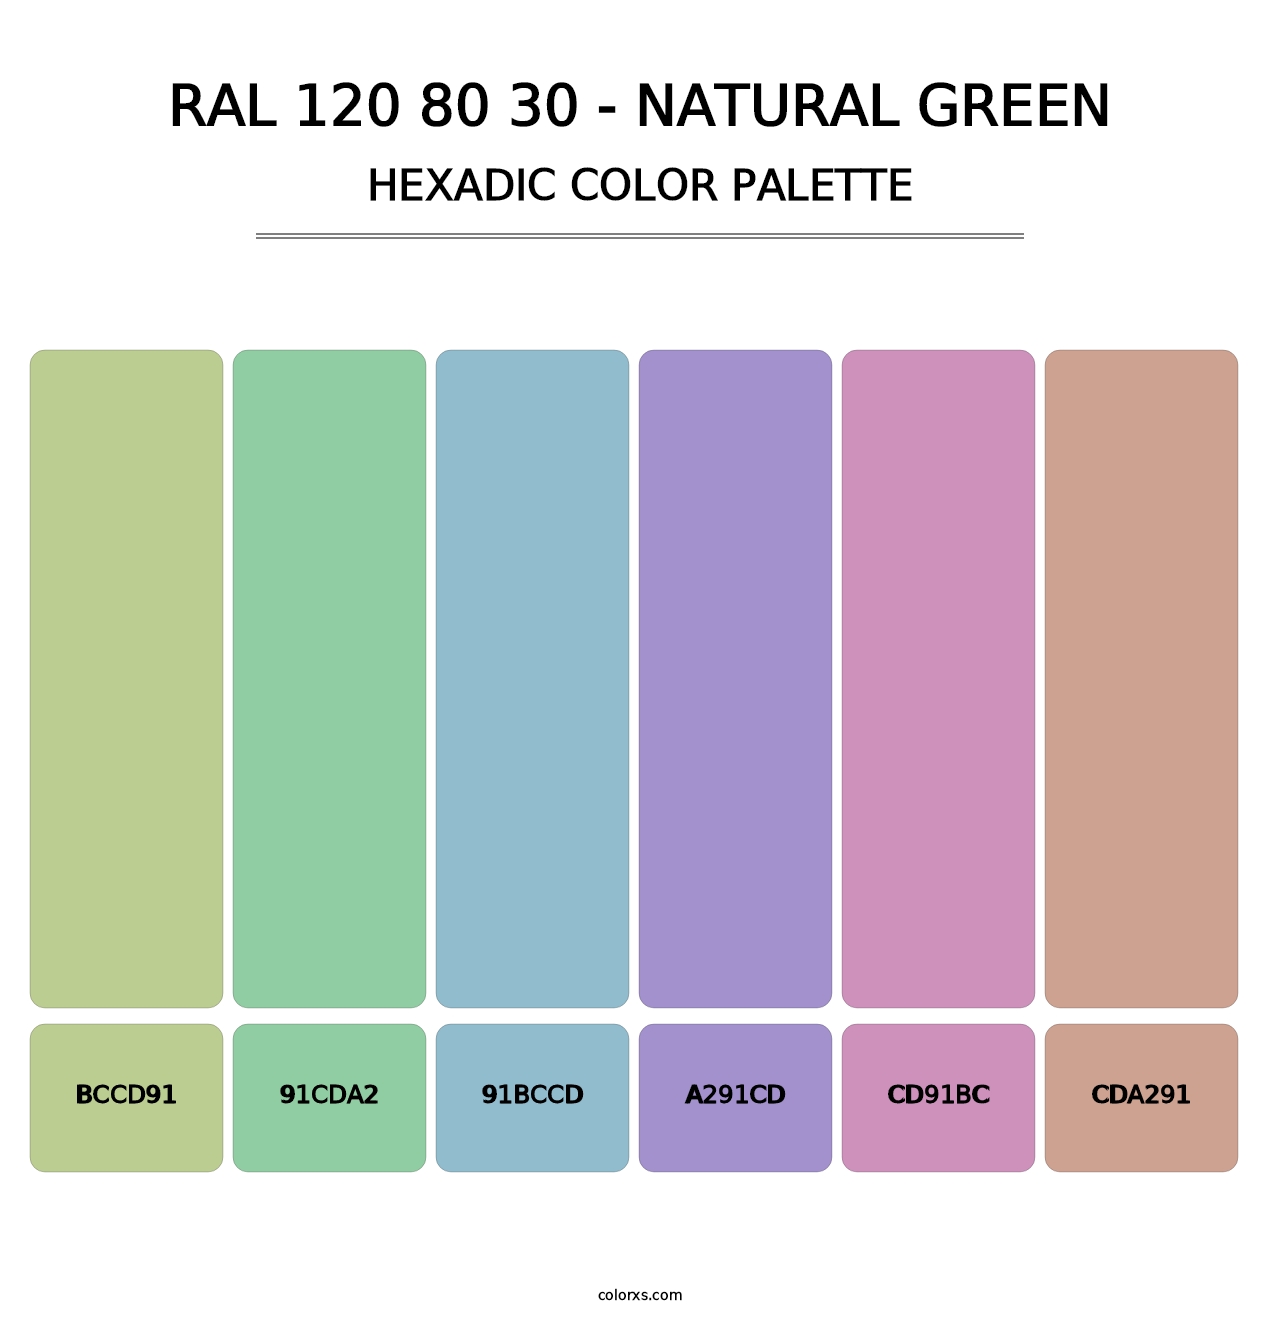 RAL 120 80 30 - Natural Green - Hexadic Color Palette